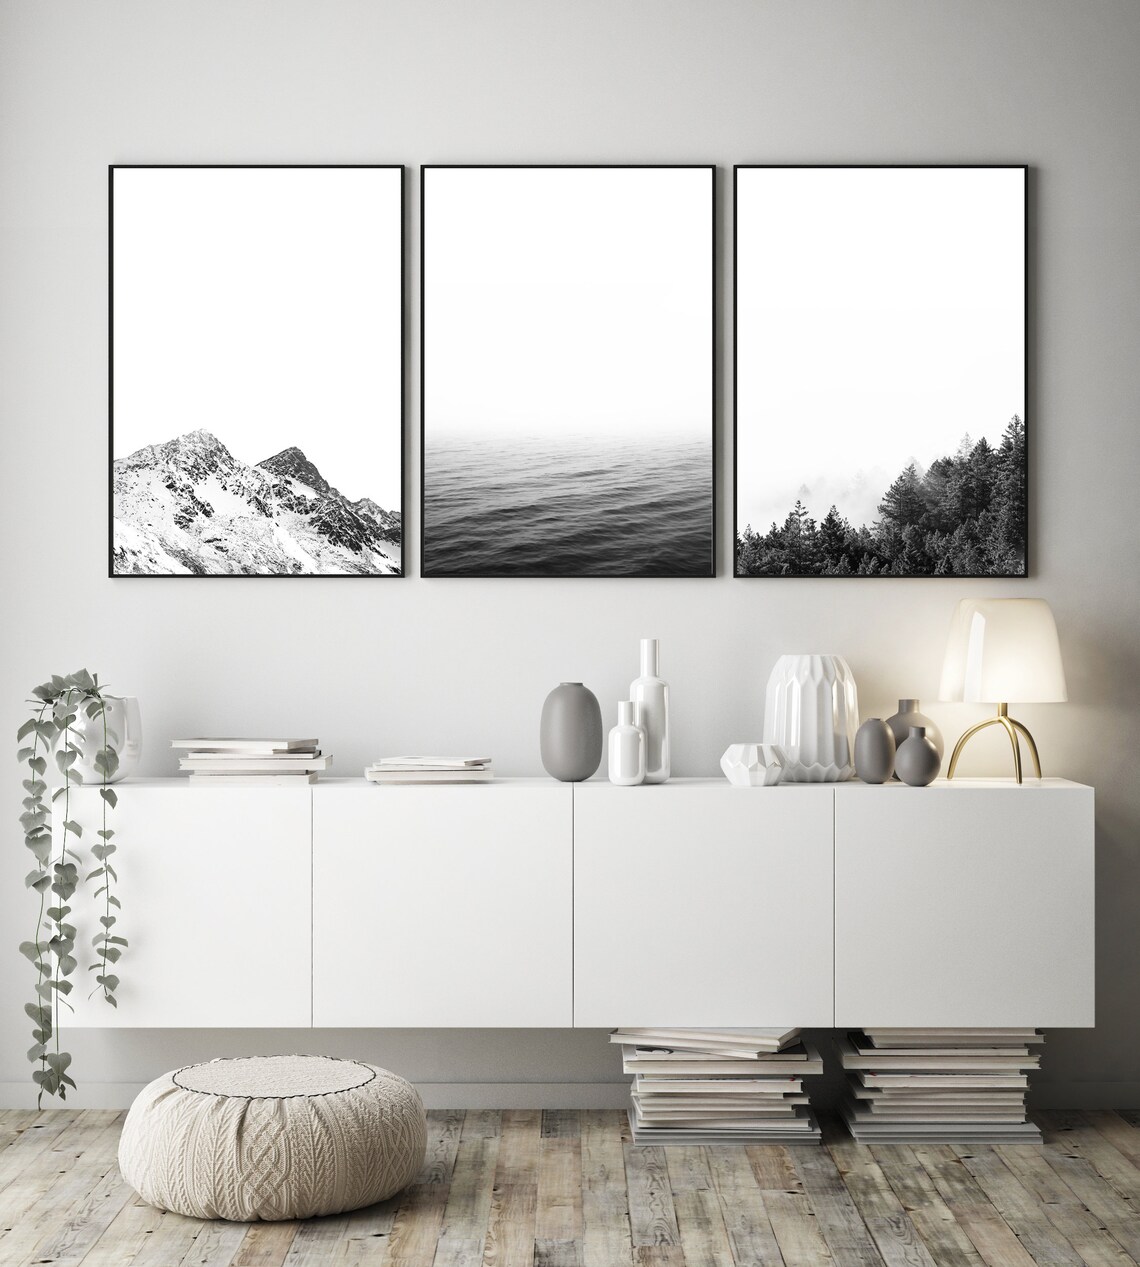 3 Piece Wall Art Black and White Nature Prints Landscape | Etsy